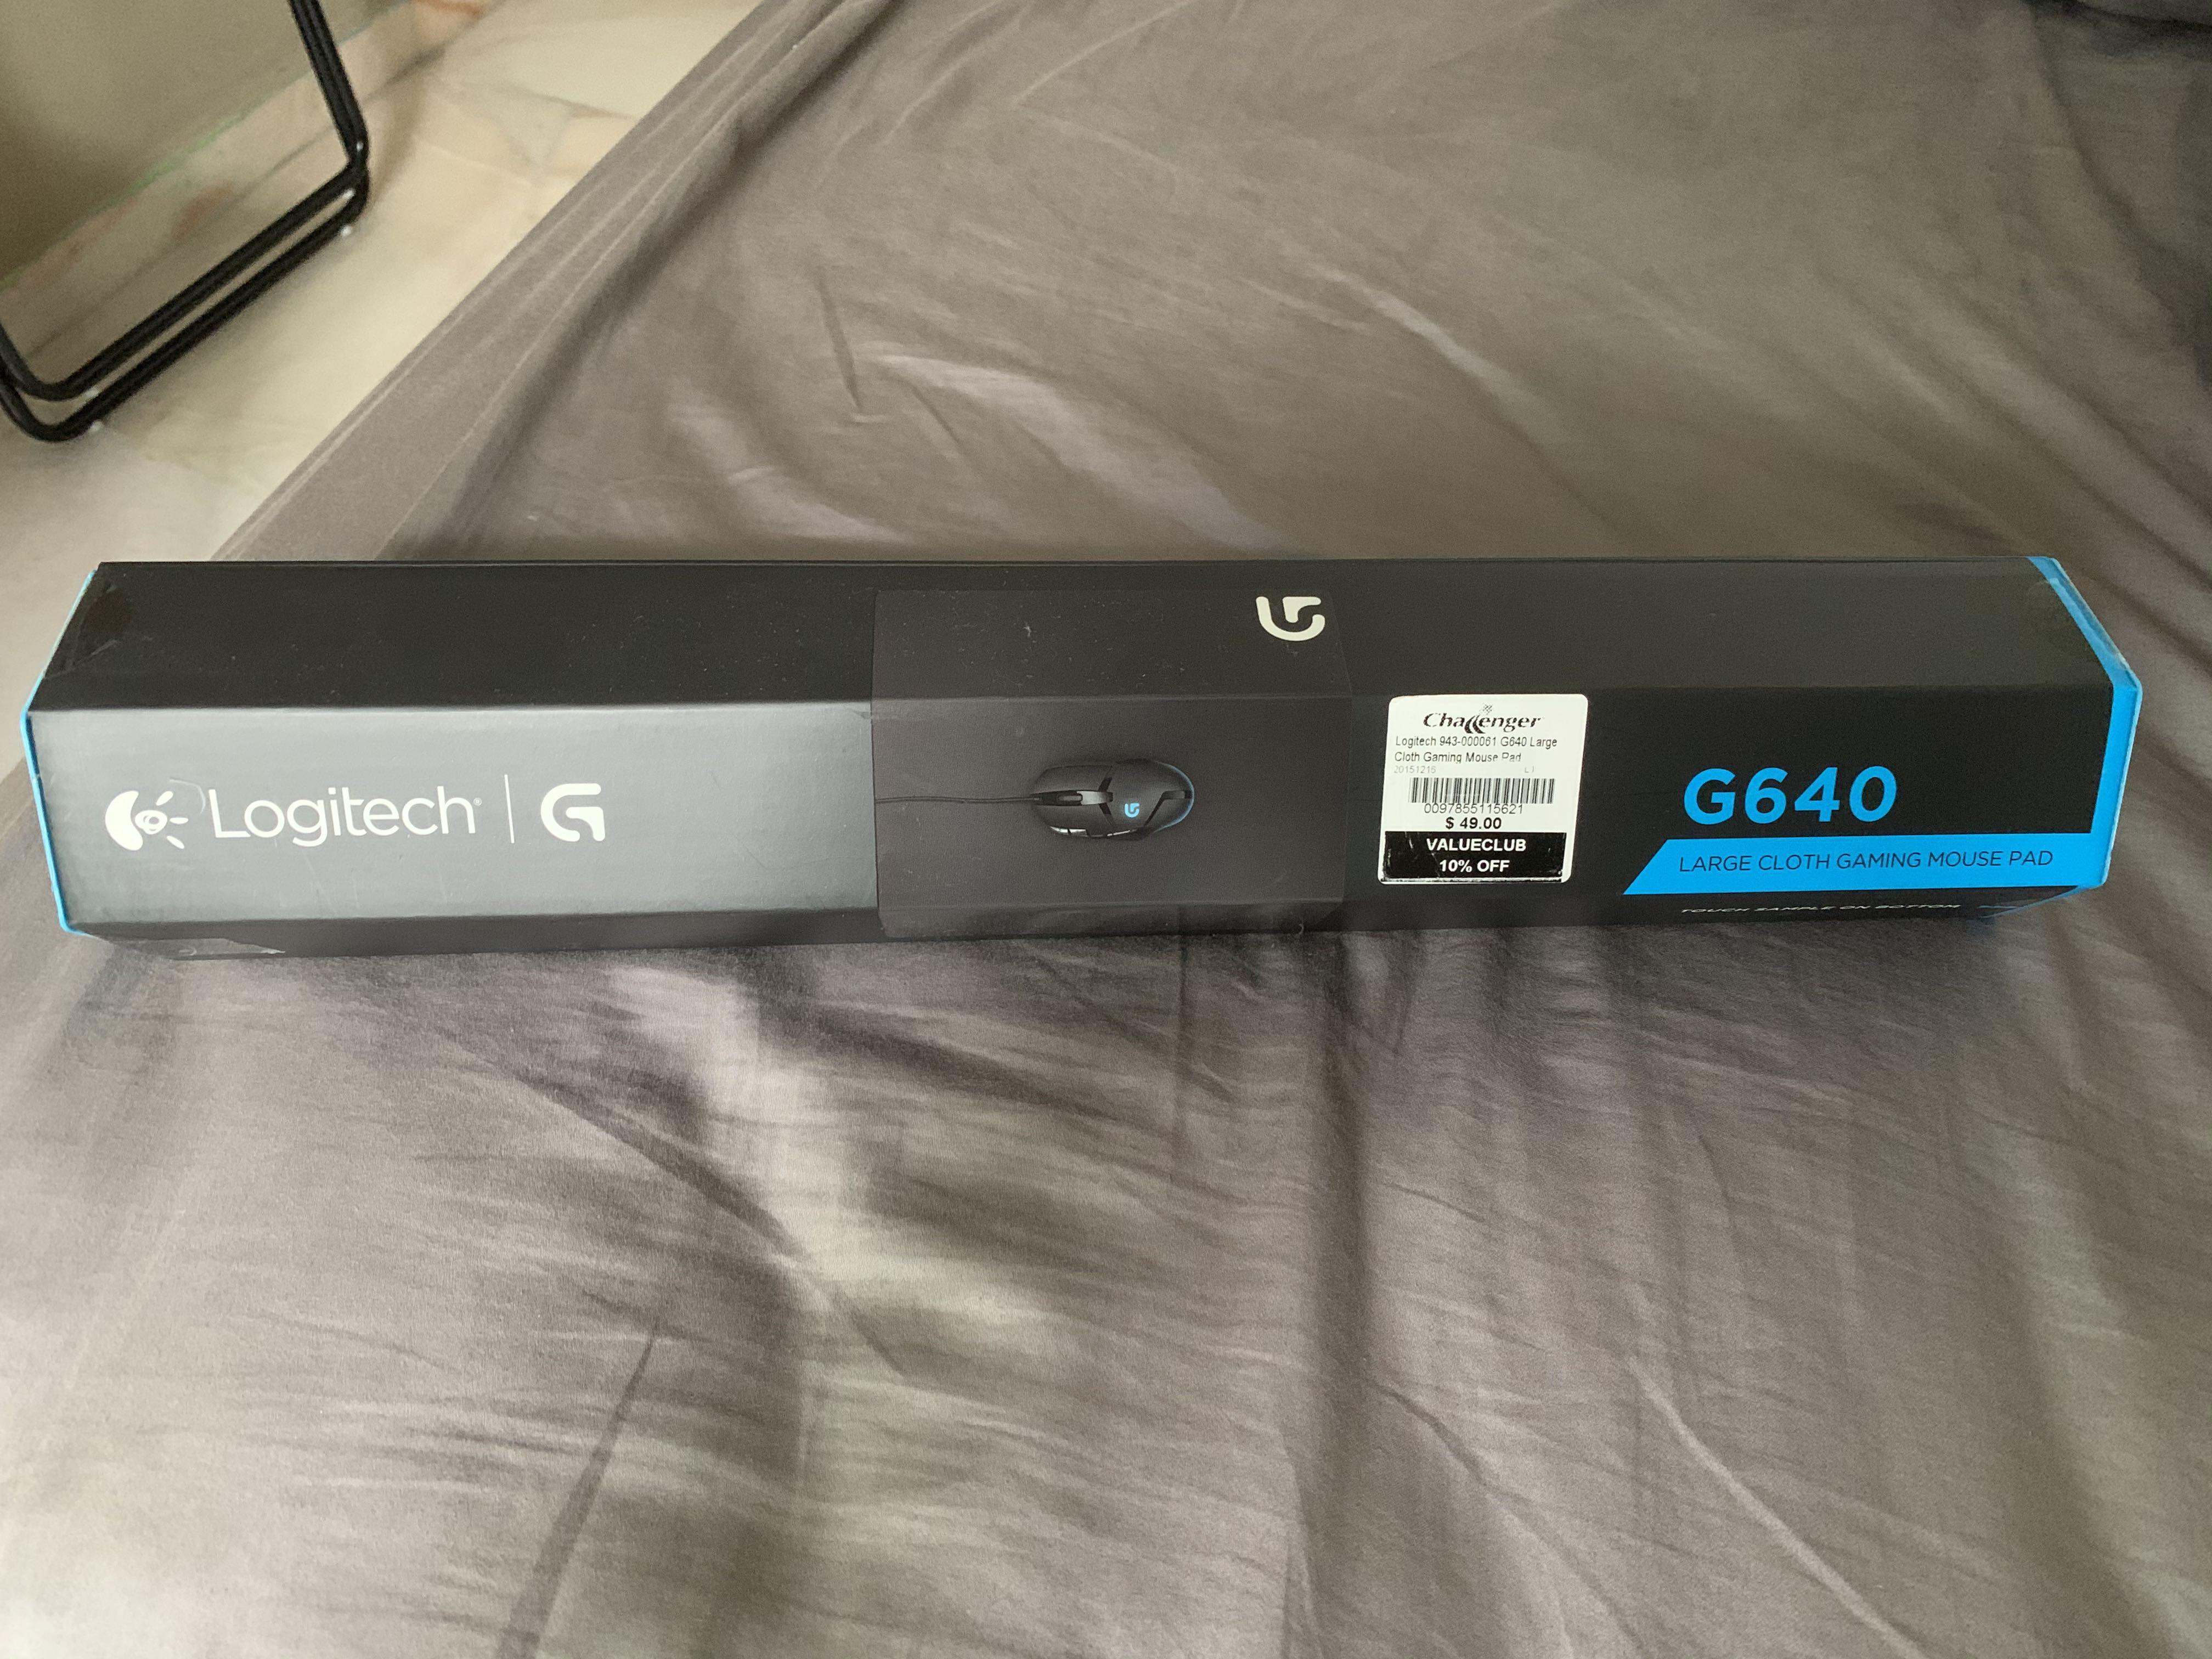 Logitech G640 Large Cloth Gaming Mouse Padp Electronics Computer Parts Accessories On Carousell